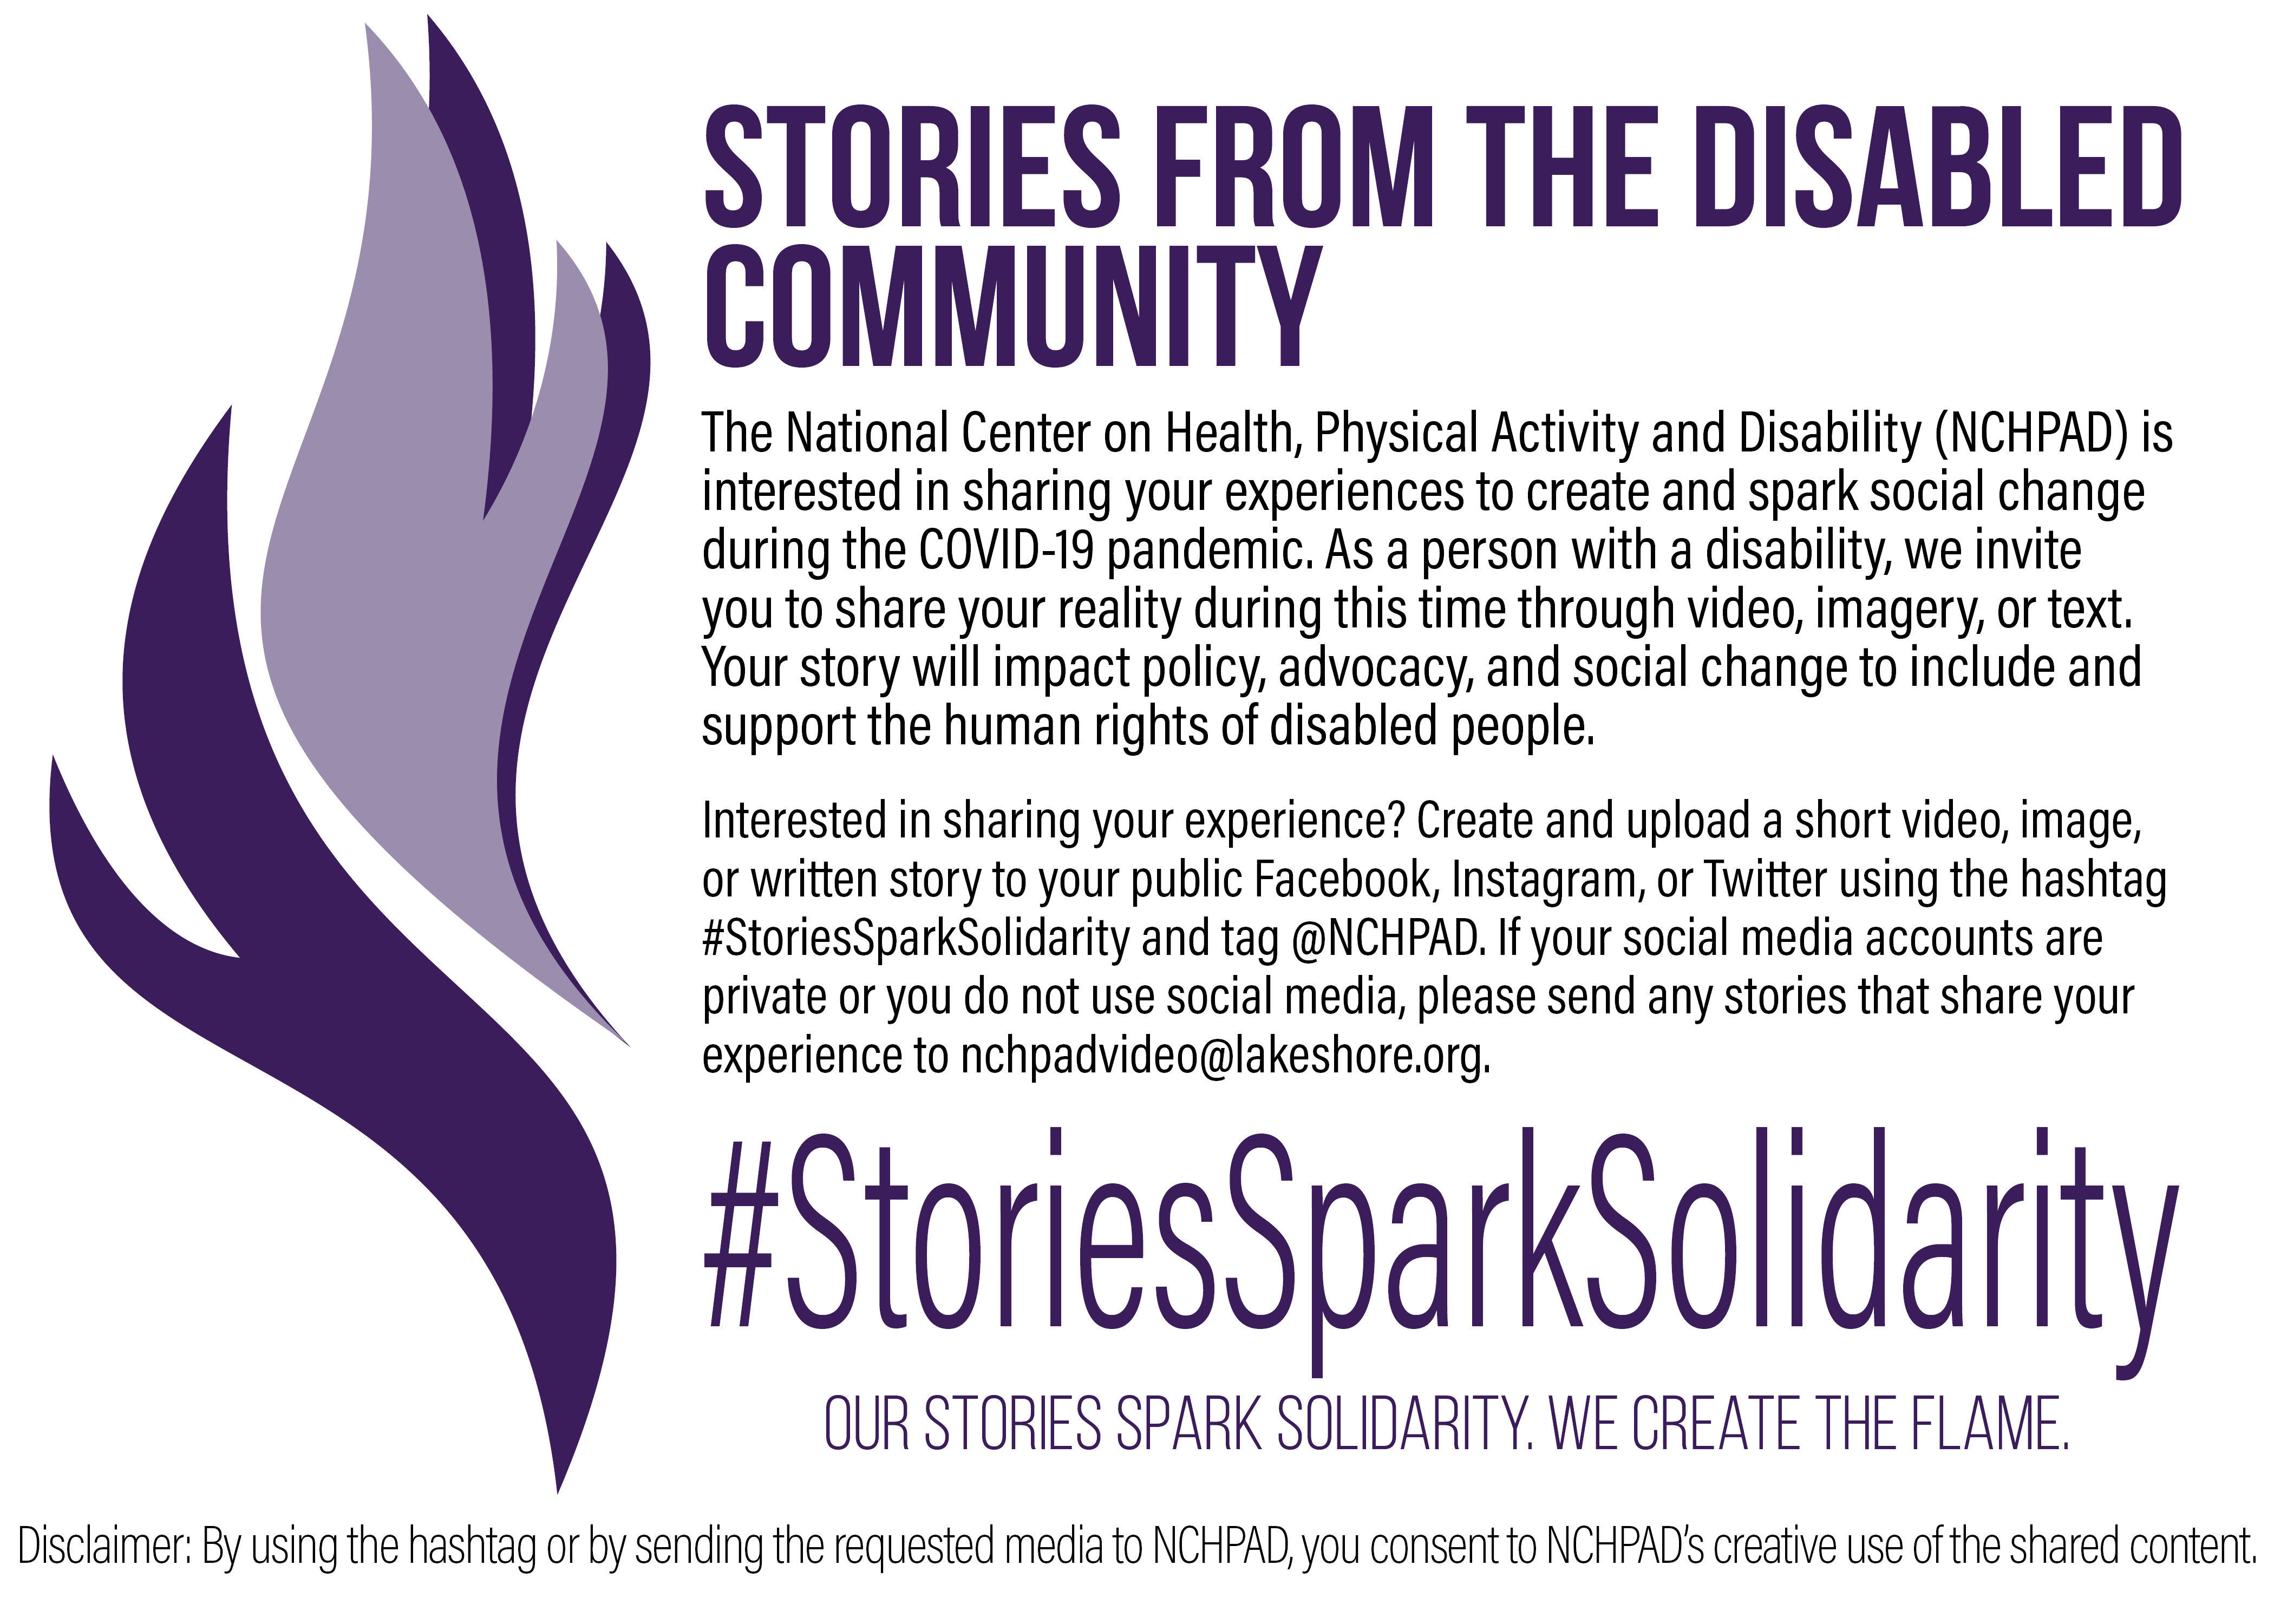 Stories Spark Solidarity Campaign : NCHPAD - Building Healthy